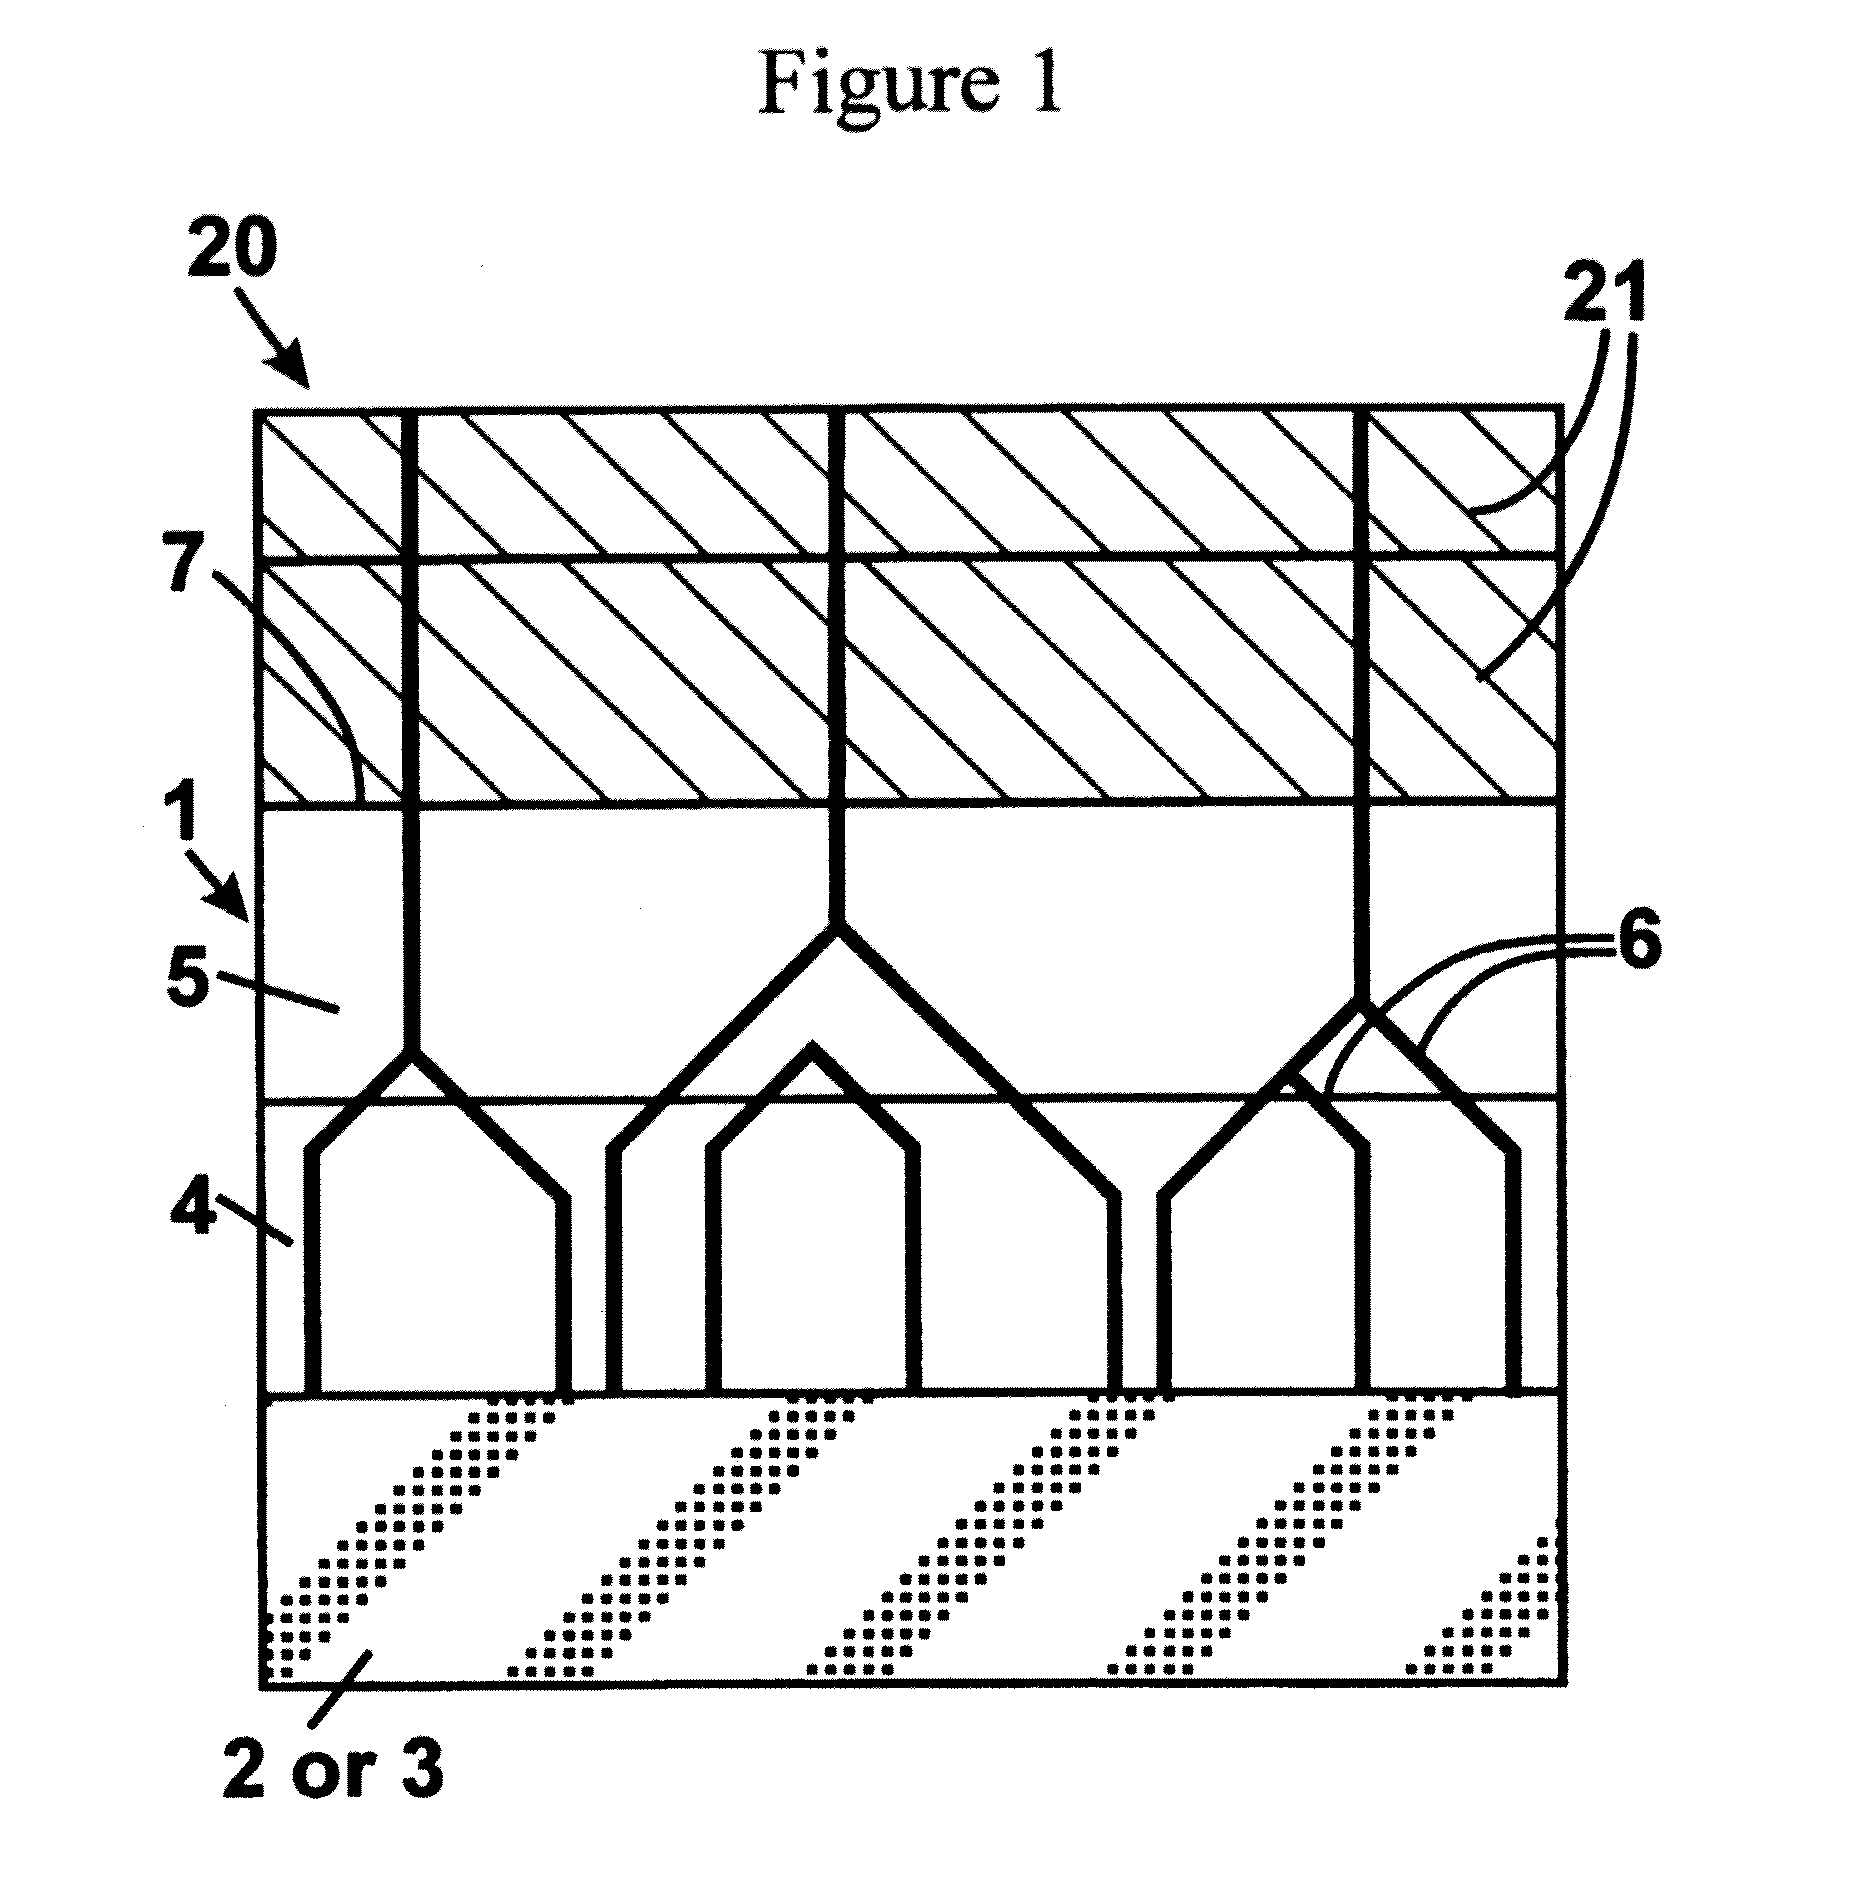 Semiconductor substrate, semiconductor device and method of manufacturing a semiconductor substrate